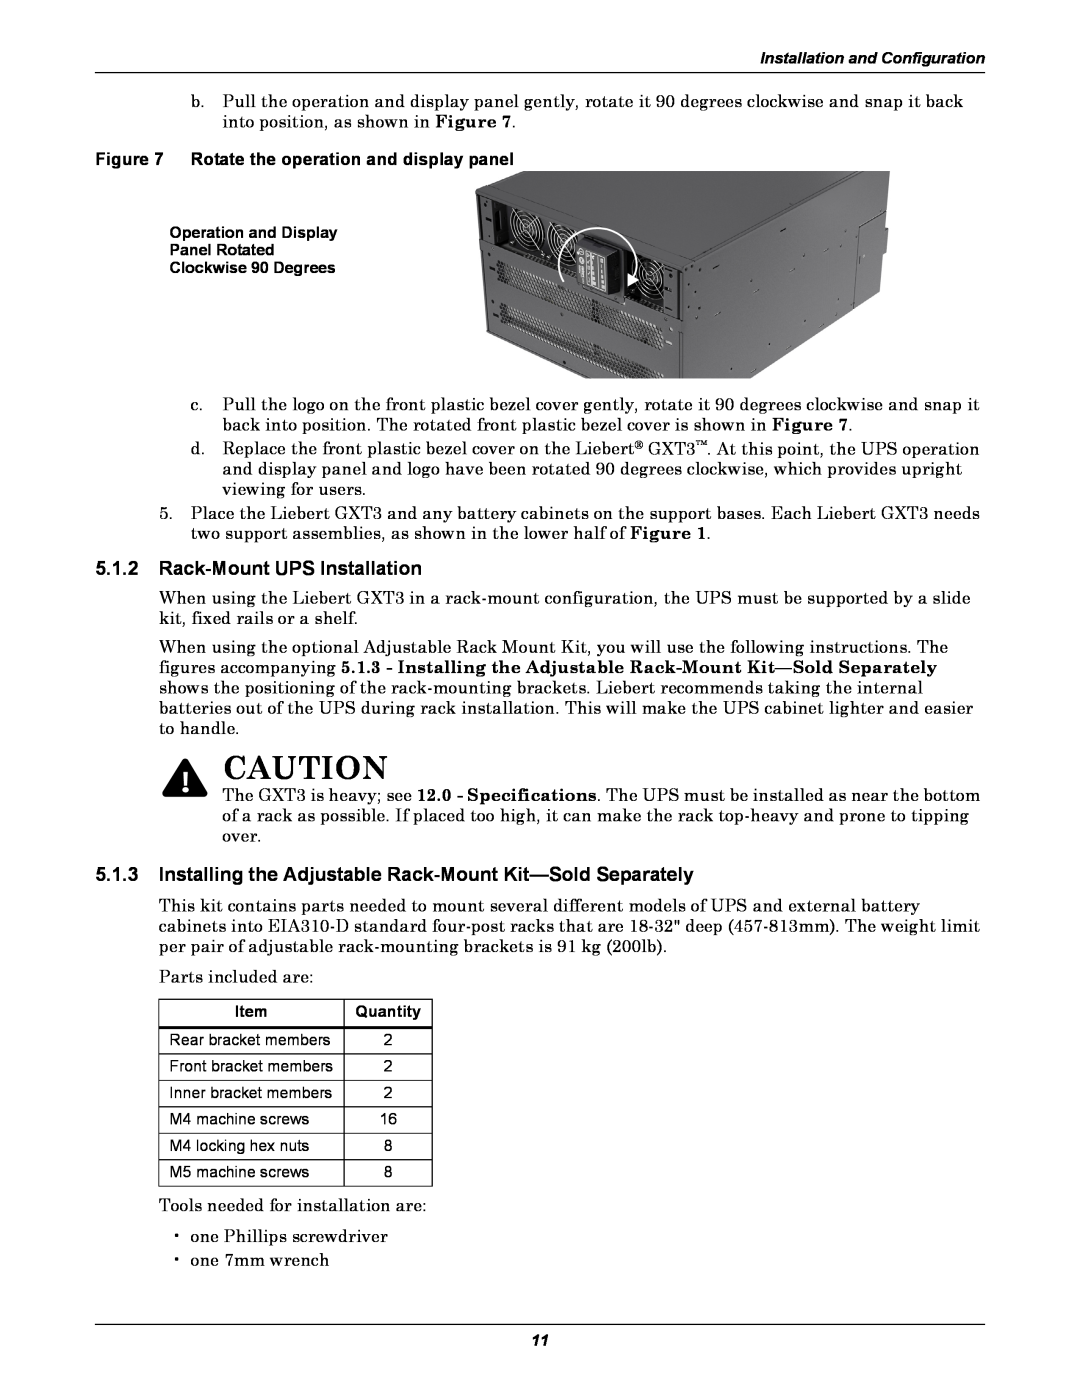 Emerson GXT3 230V user manual 5.1.2Rack-MountUPS Installation, Rotate the operation and display panel 